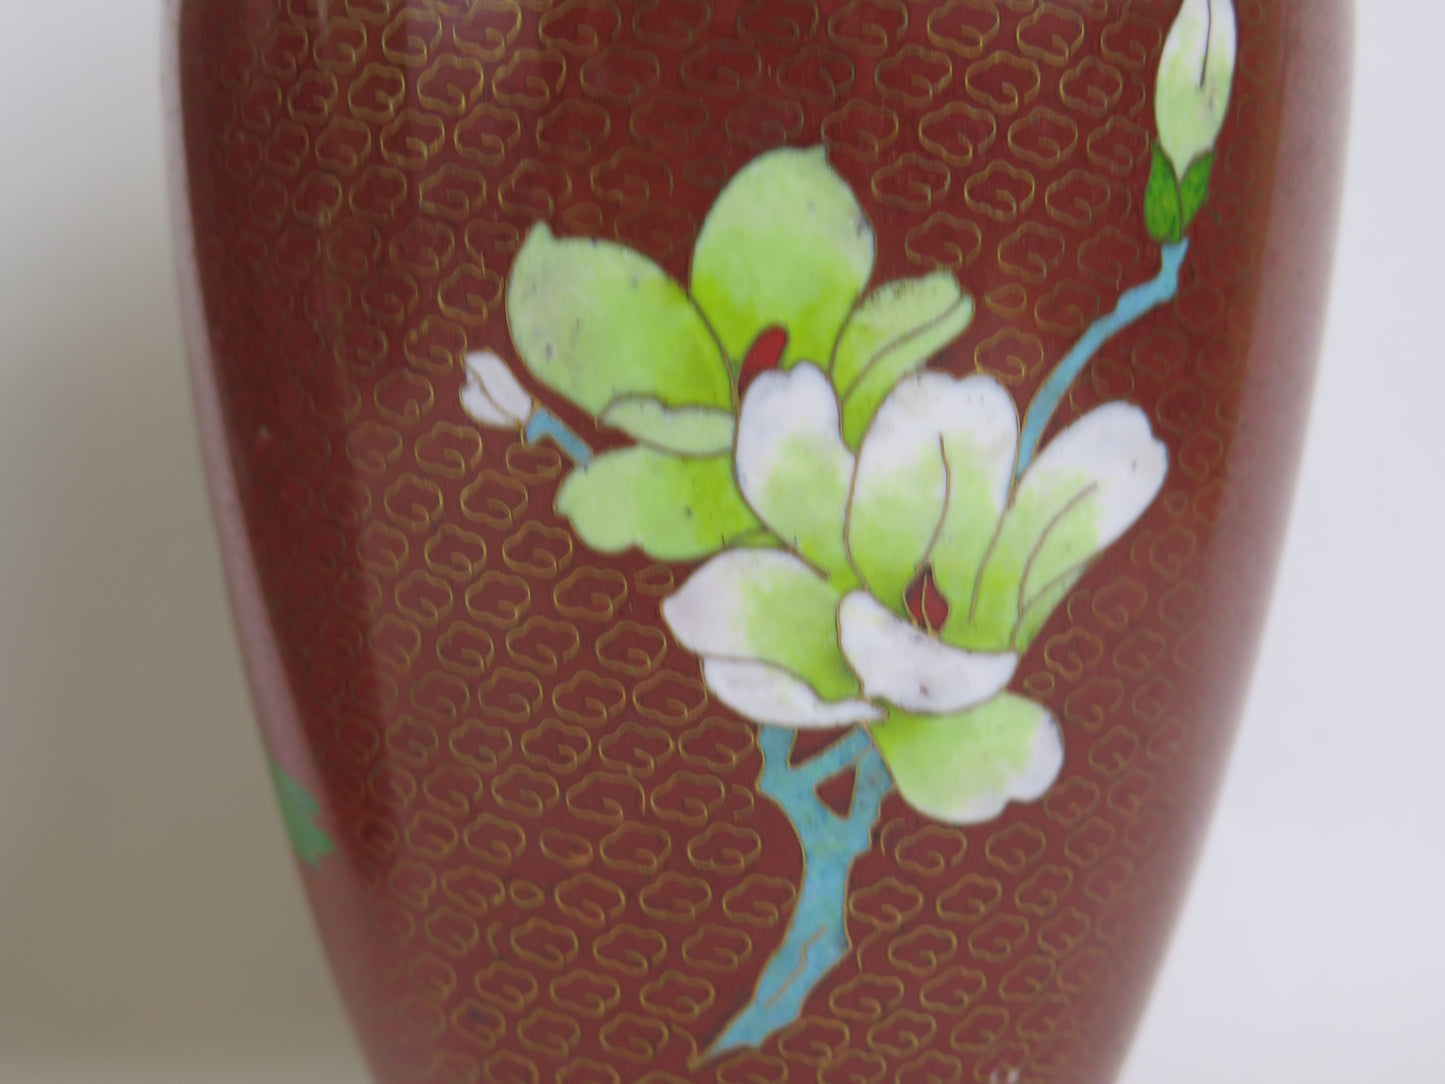 Pair of cloisonné vases vintage vase China Asia red colored floral flowers CM1